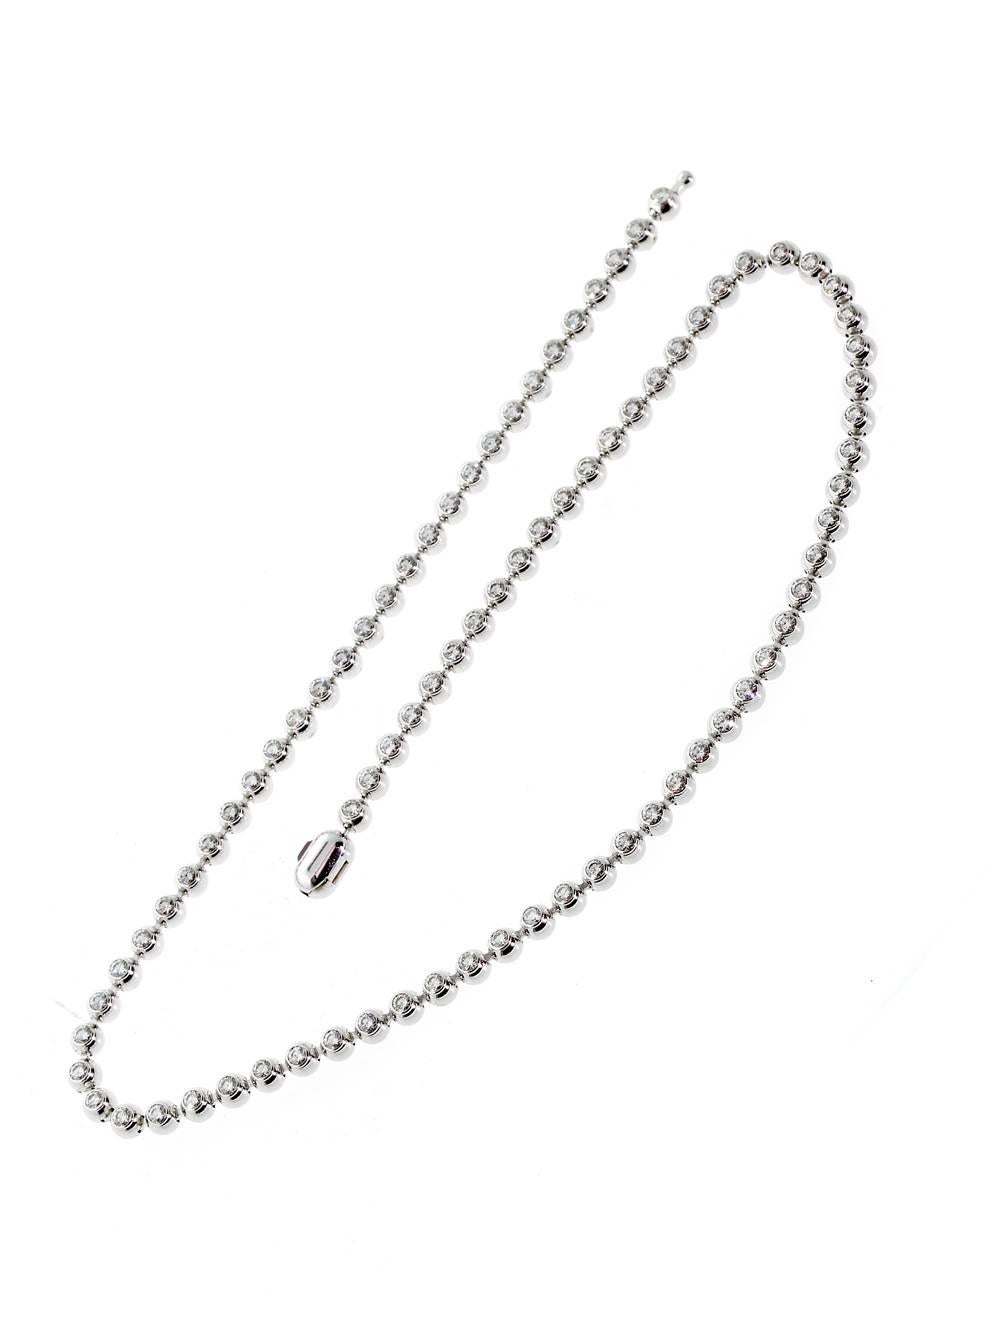 A chic Cartier beaded design tennis necklace in 18k white gold featuring 4.62cts of the finest Vs quality round brilliant cut diamonds. 

Necklace Length: 15″

Inventory ID: 0000086